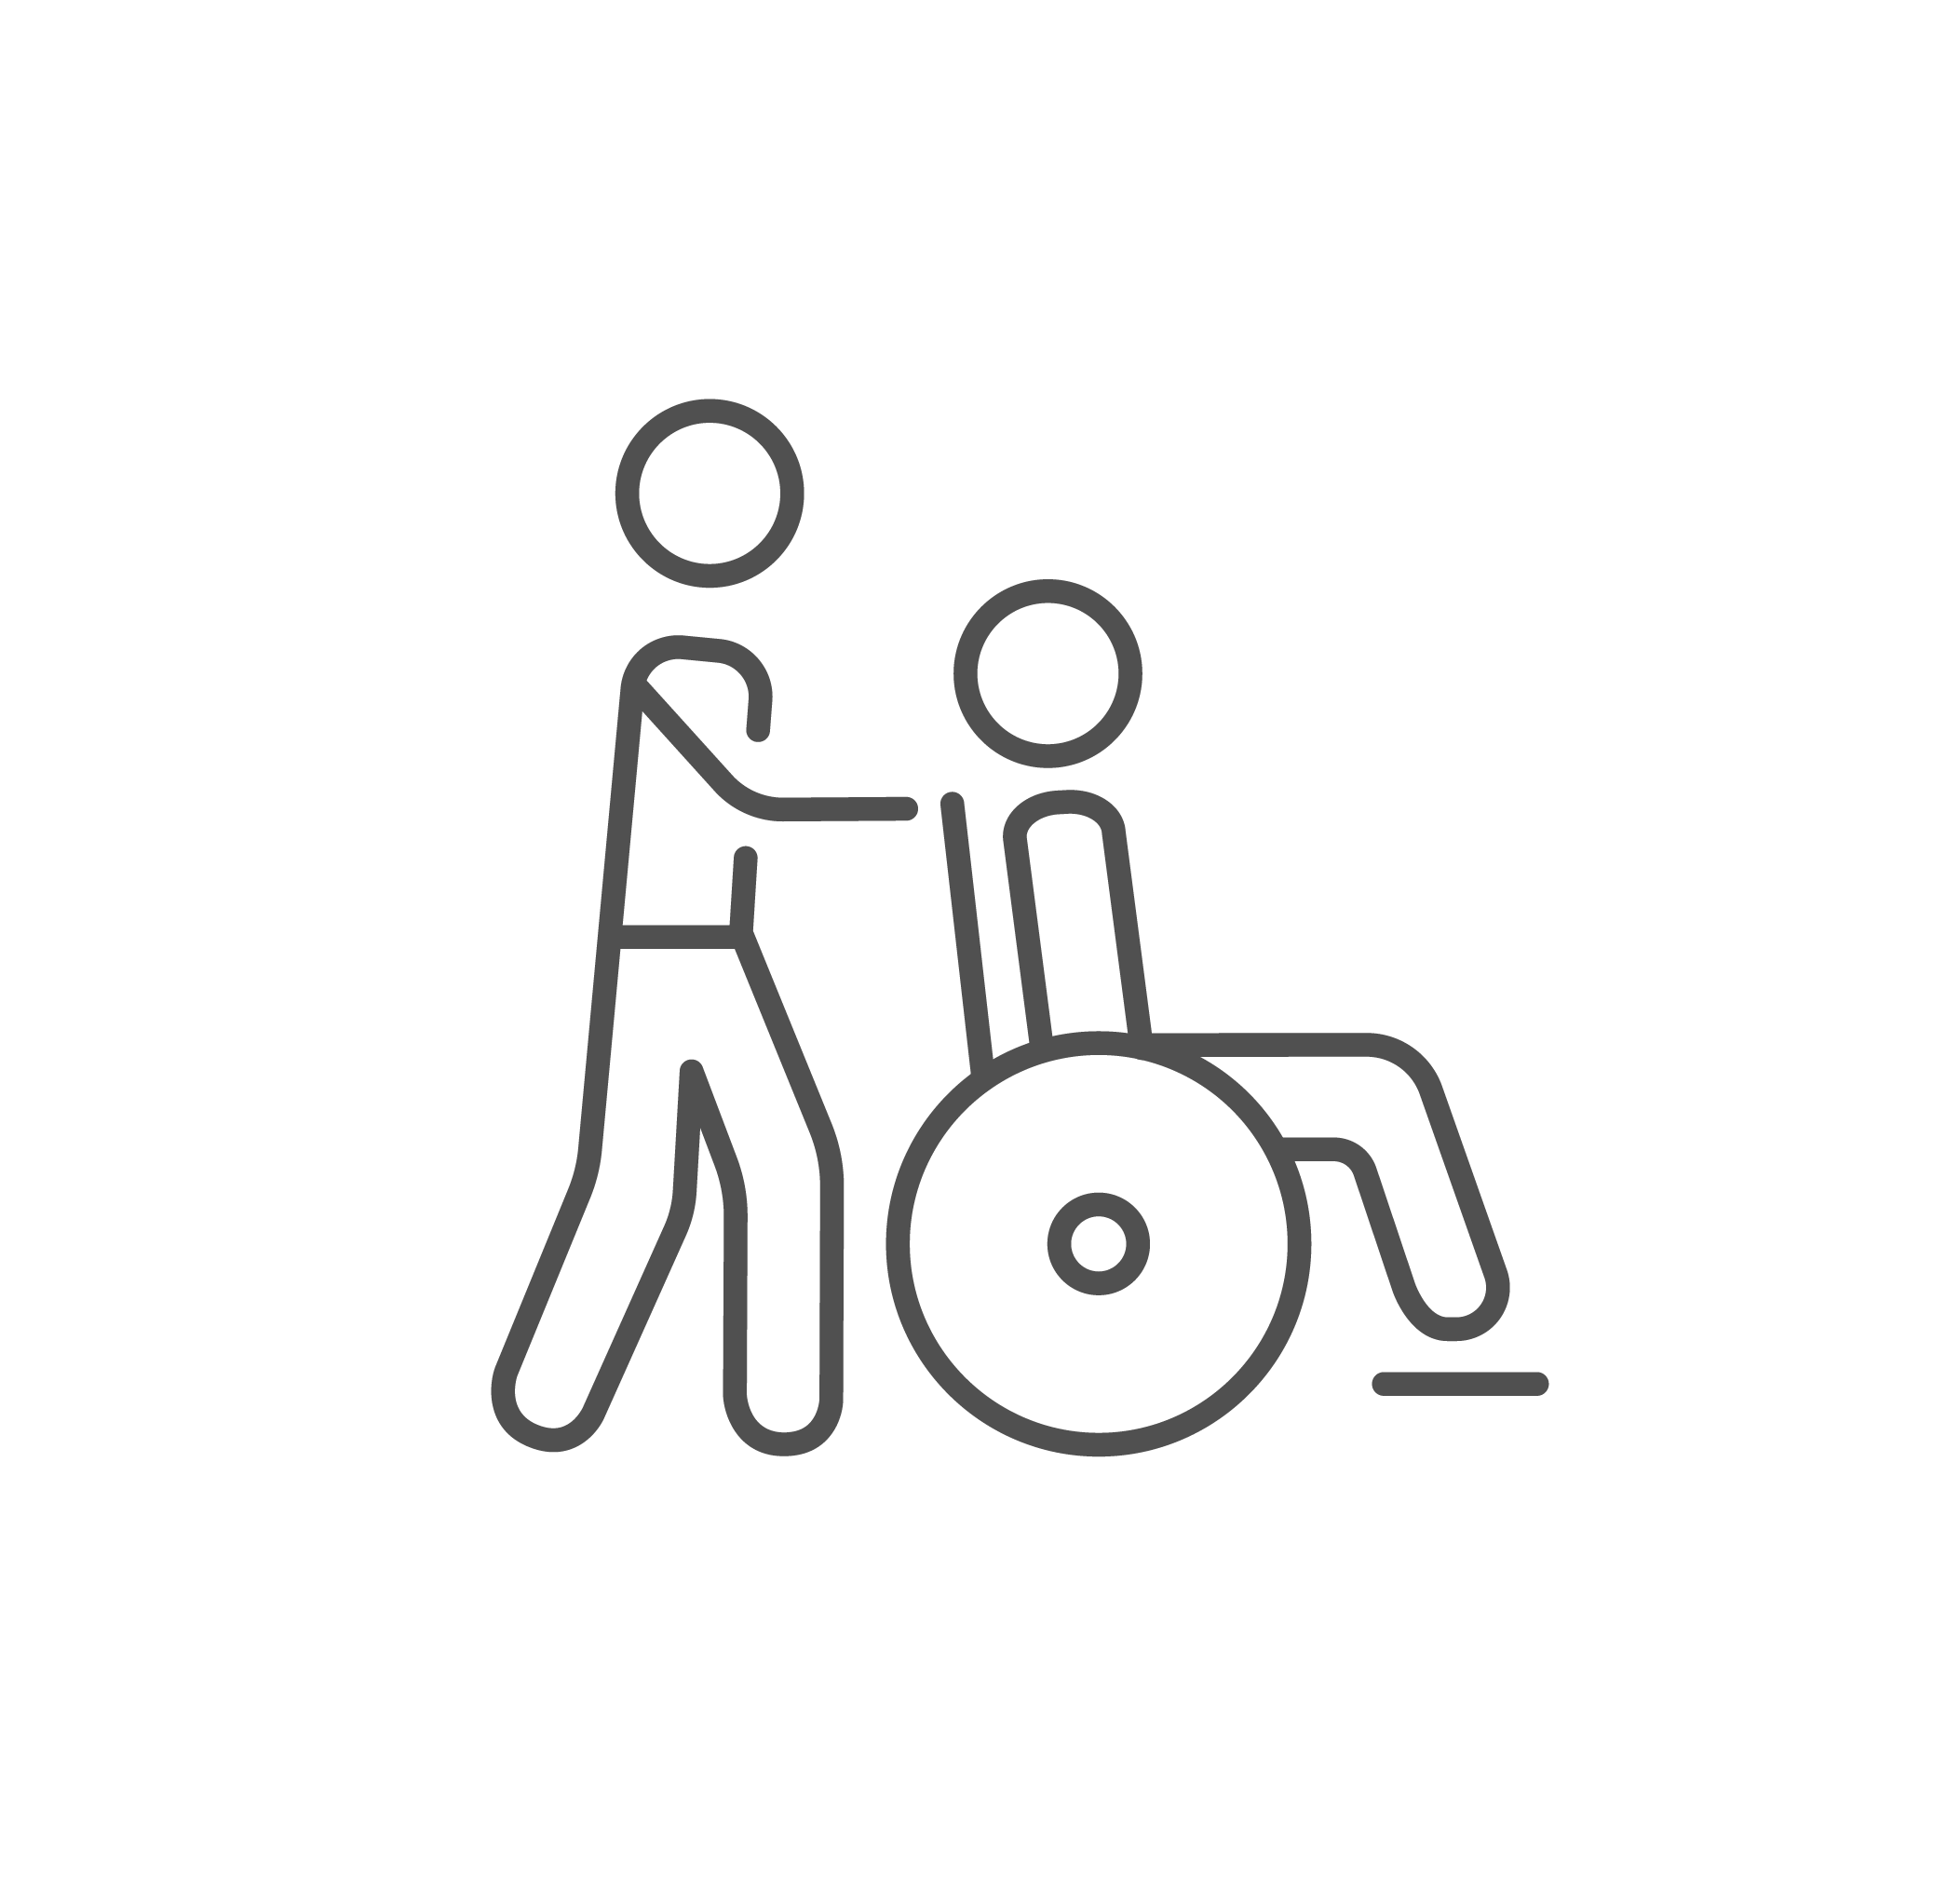 Person pushing someone else in wheel chair icon